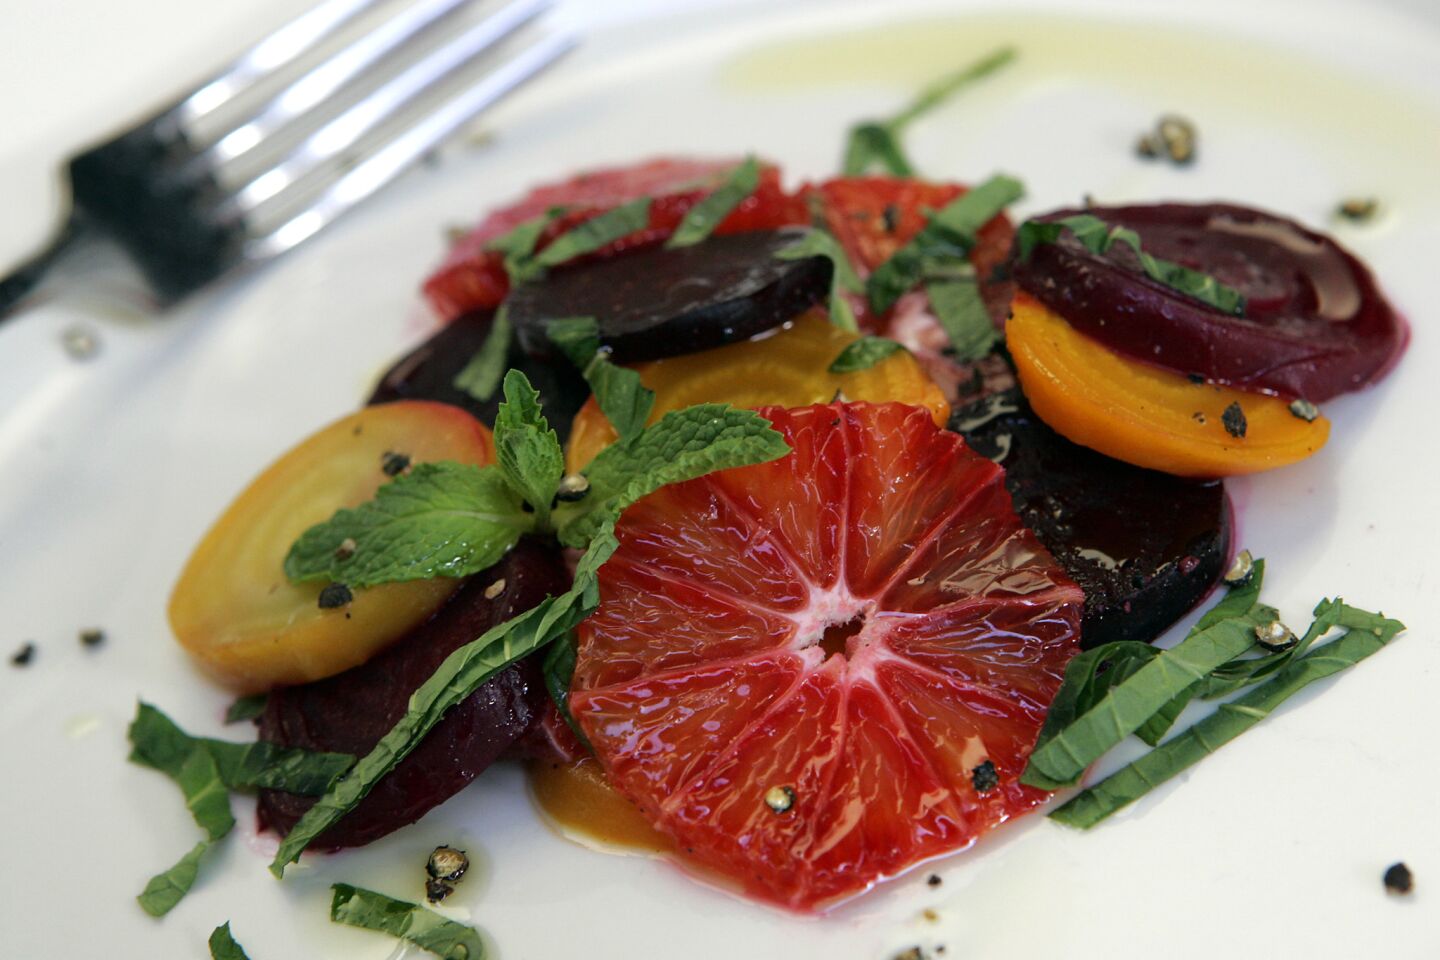 Recipe: Beets and blood oranges with mint and orange flower water